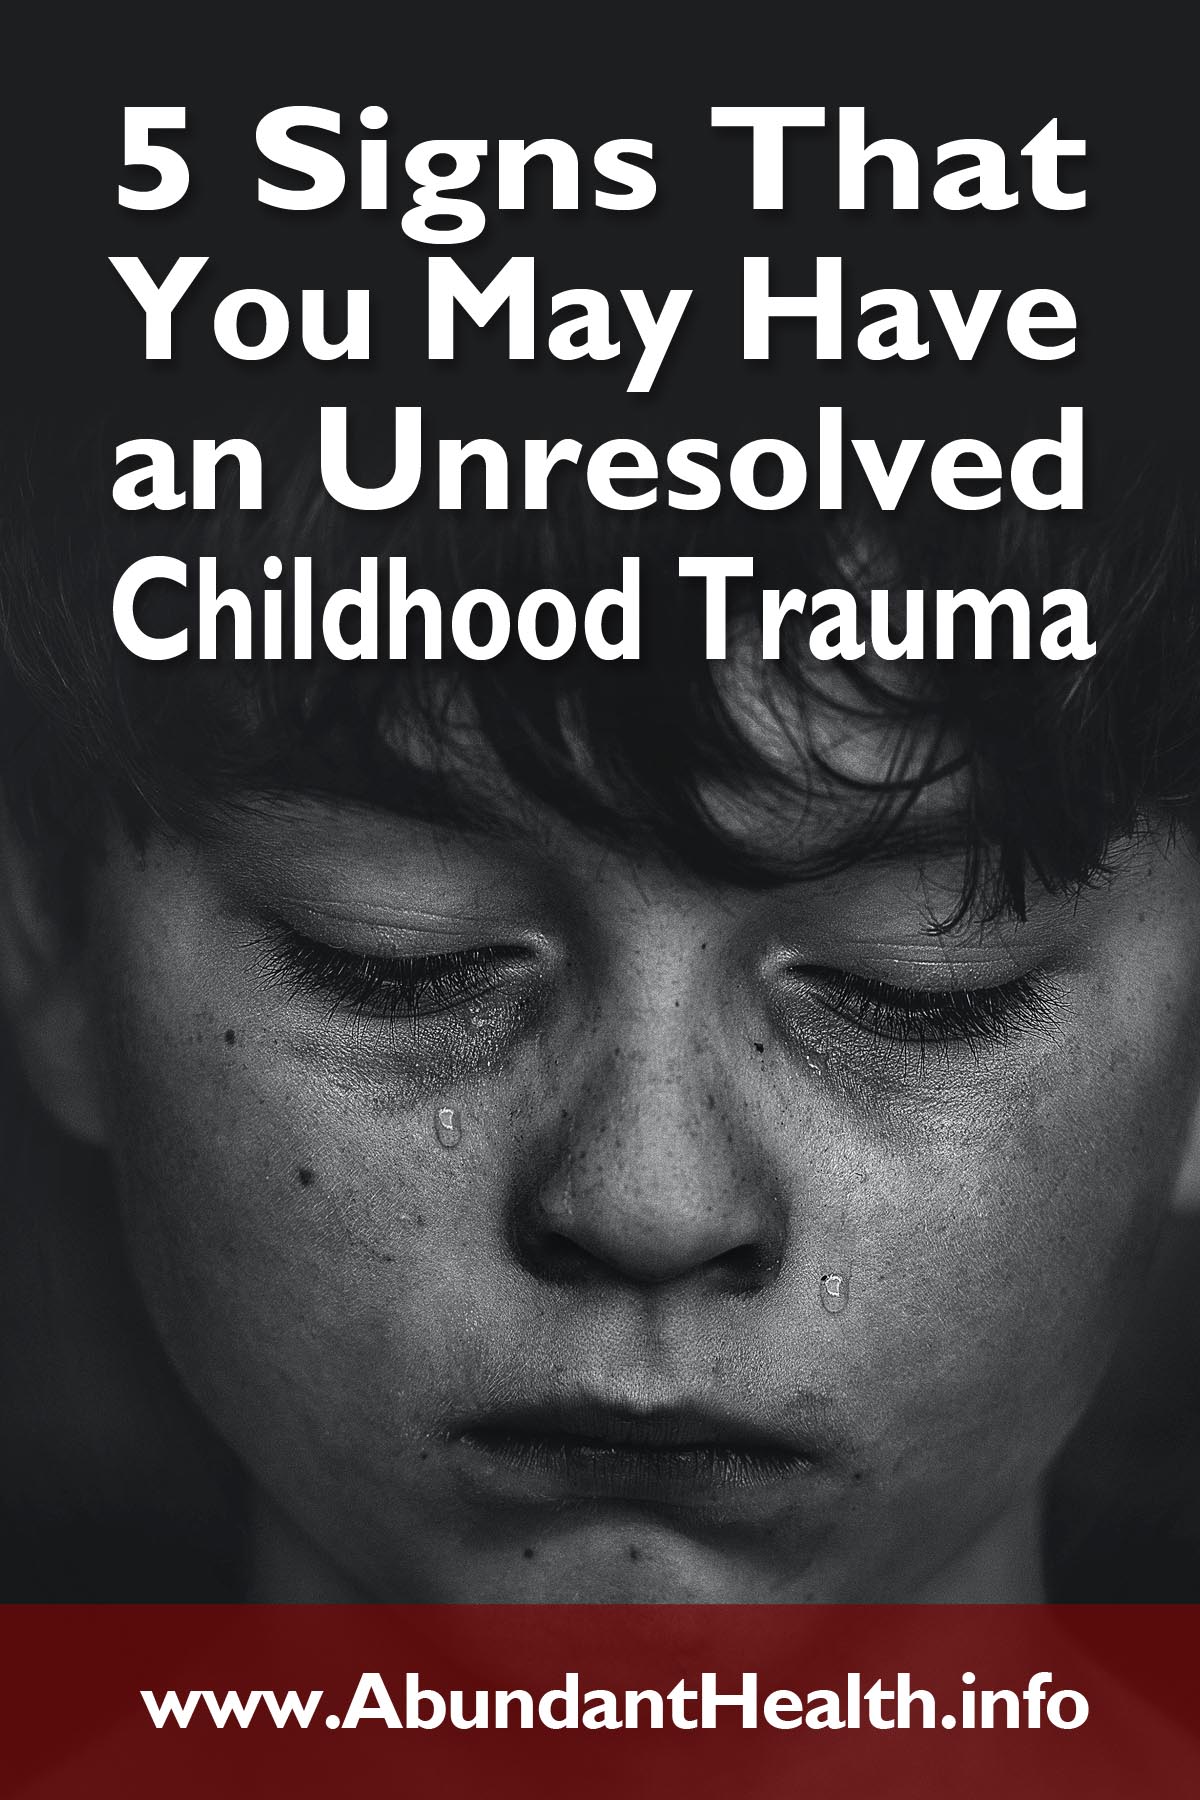 5 Signs That You May Have an Unresolved Childhood Trauma